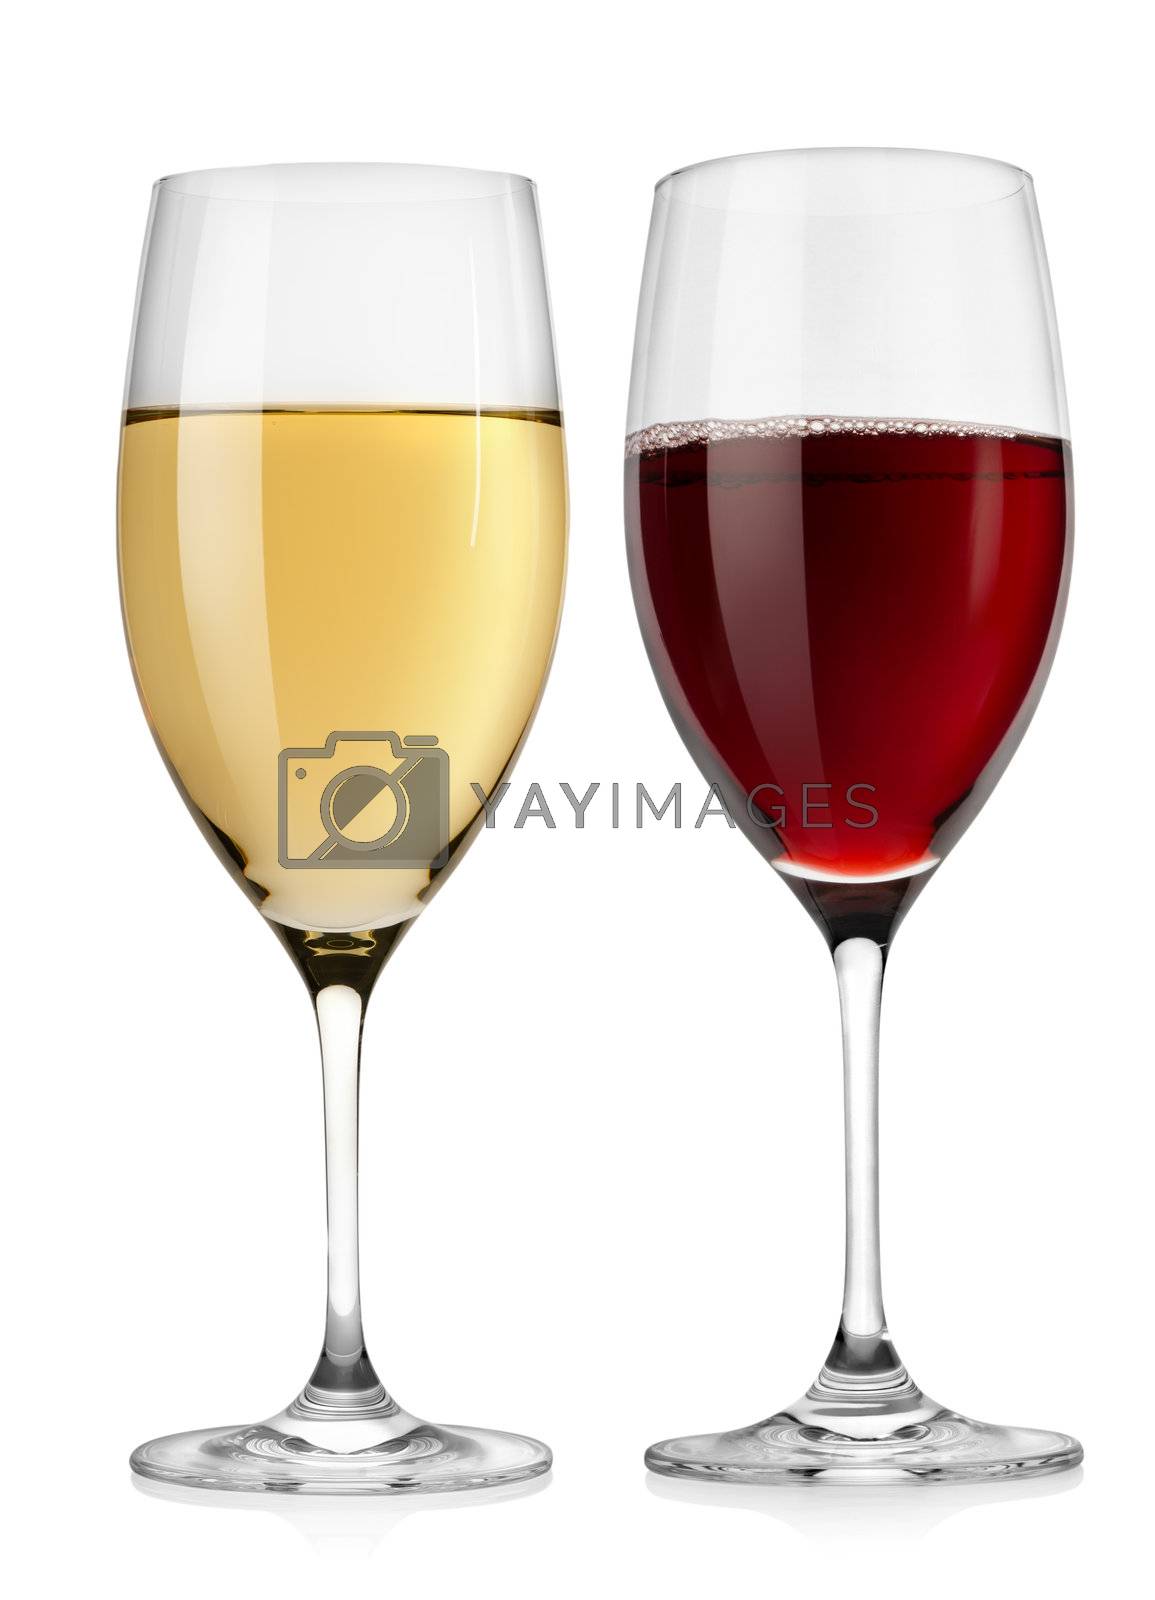 Royalty free image of Red wine glass and white wine glass by Givaga